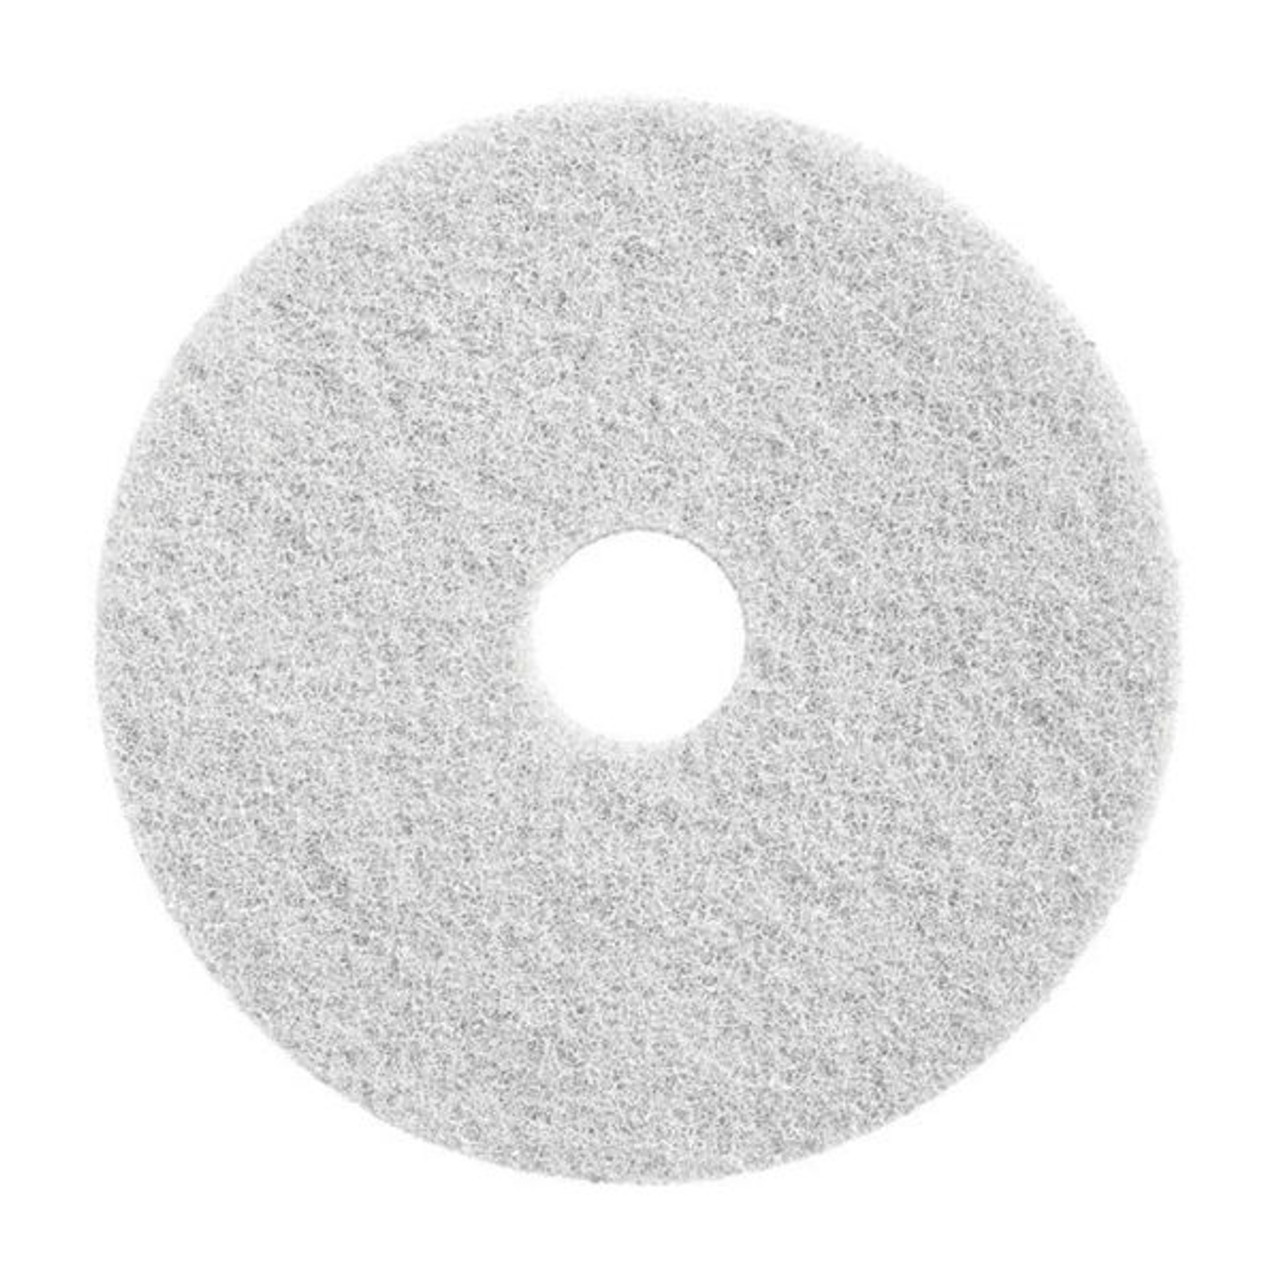 Twister diamond floor pads 800 grit 20 inch white for aggressive cleaning  removes scratches for polishing stone case of 2 pads 435320 gw